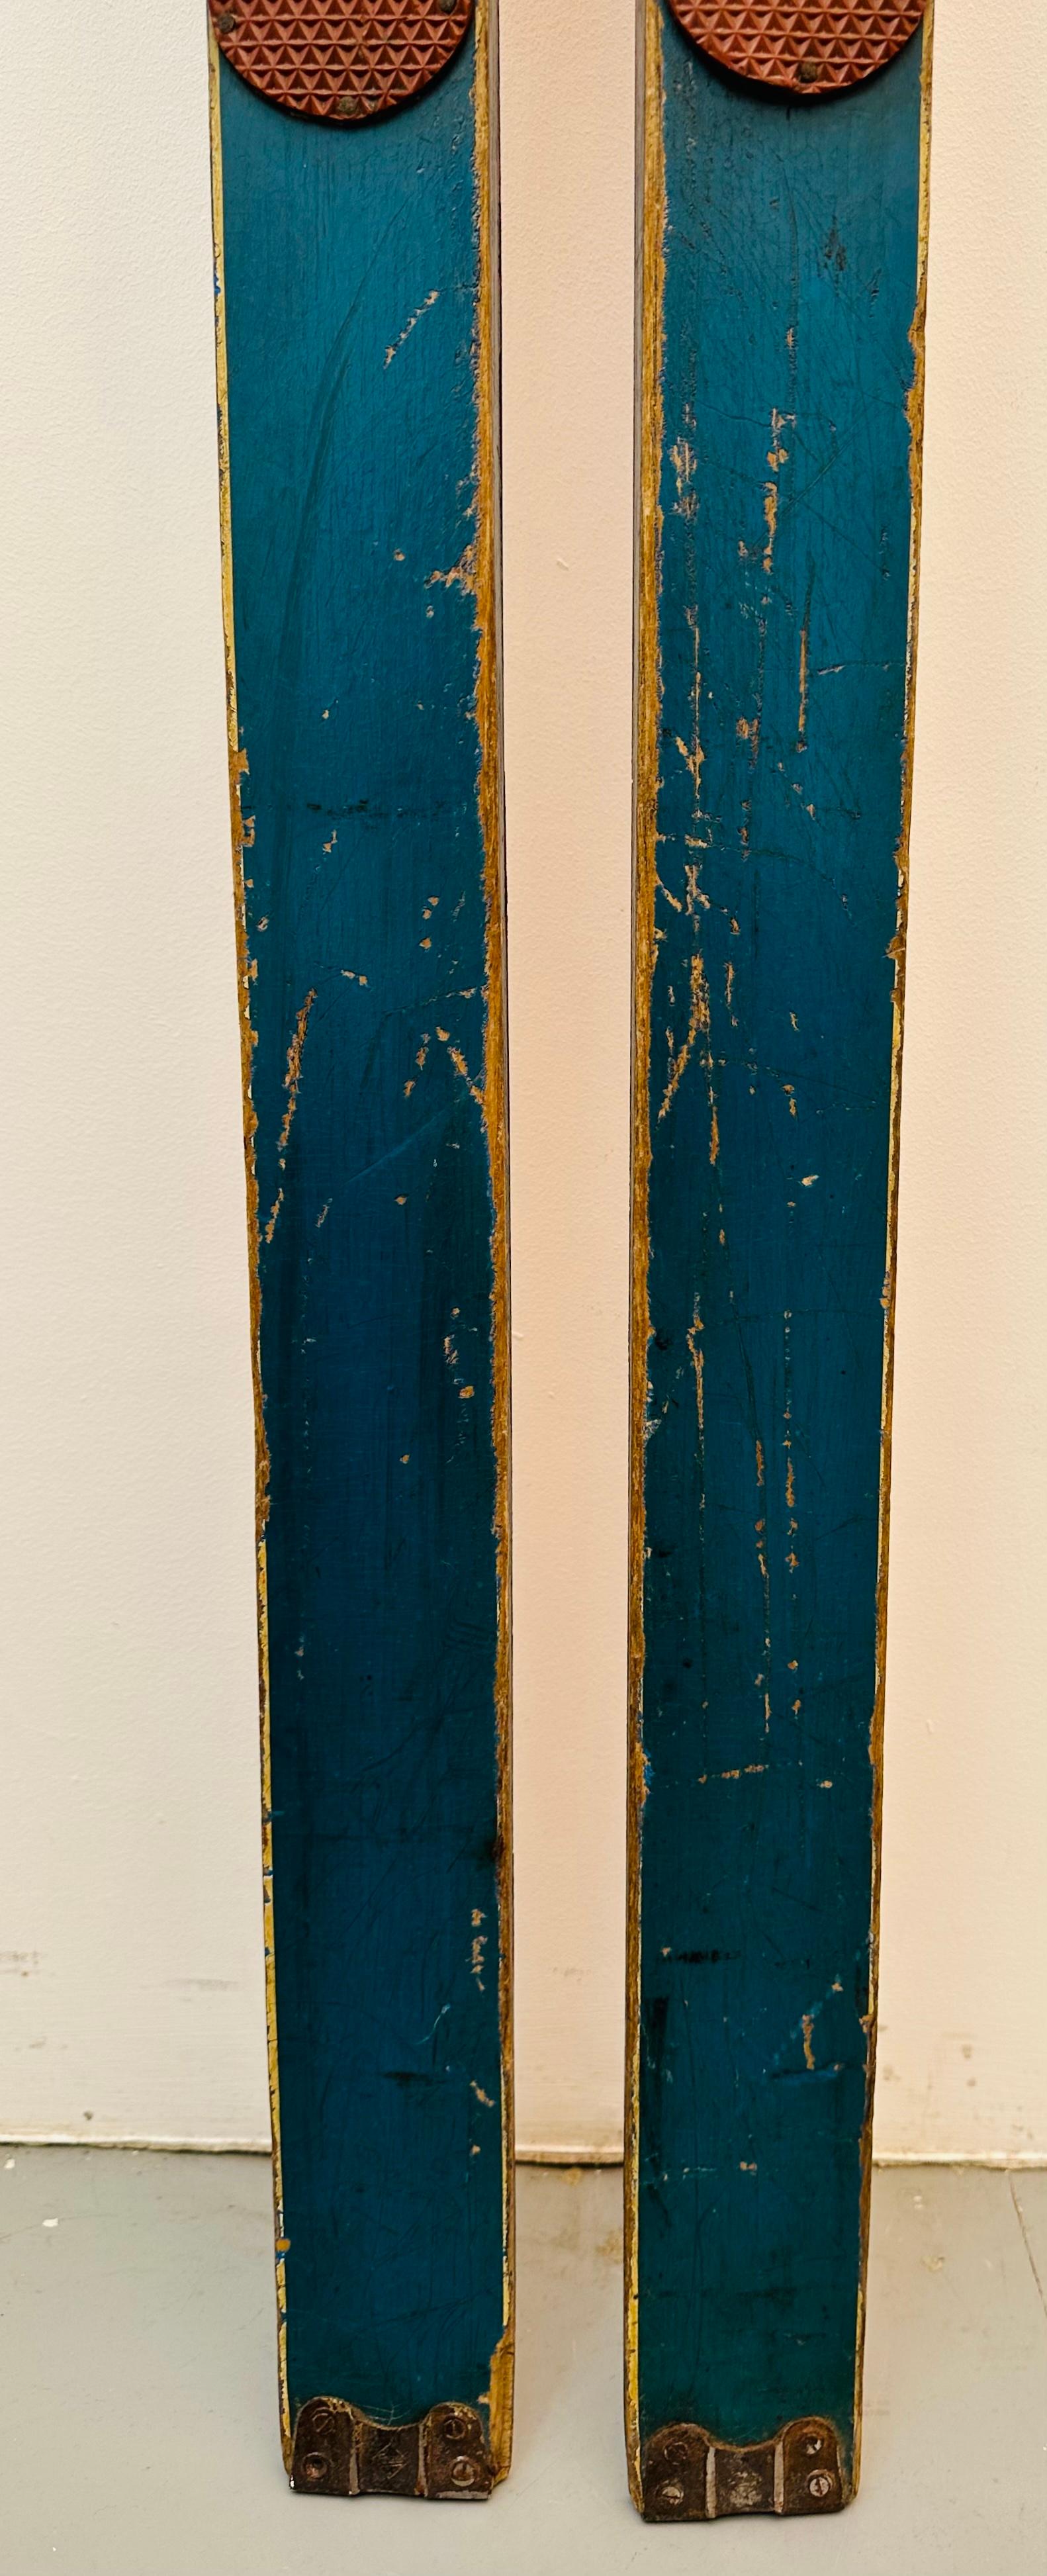 Rustic Vintage Circa 1950s Wooden Skis with Bindings by Spezial Schichten Hohnberg For Sale